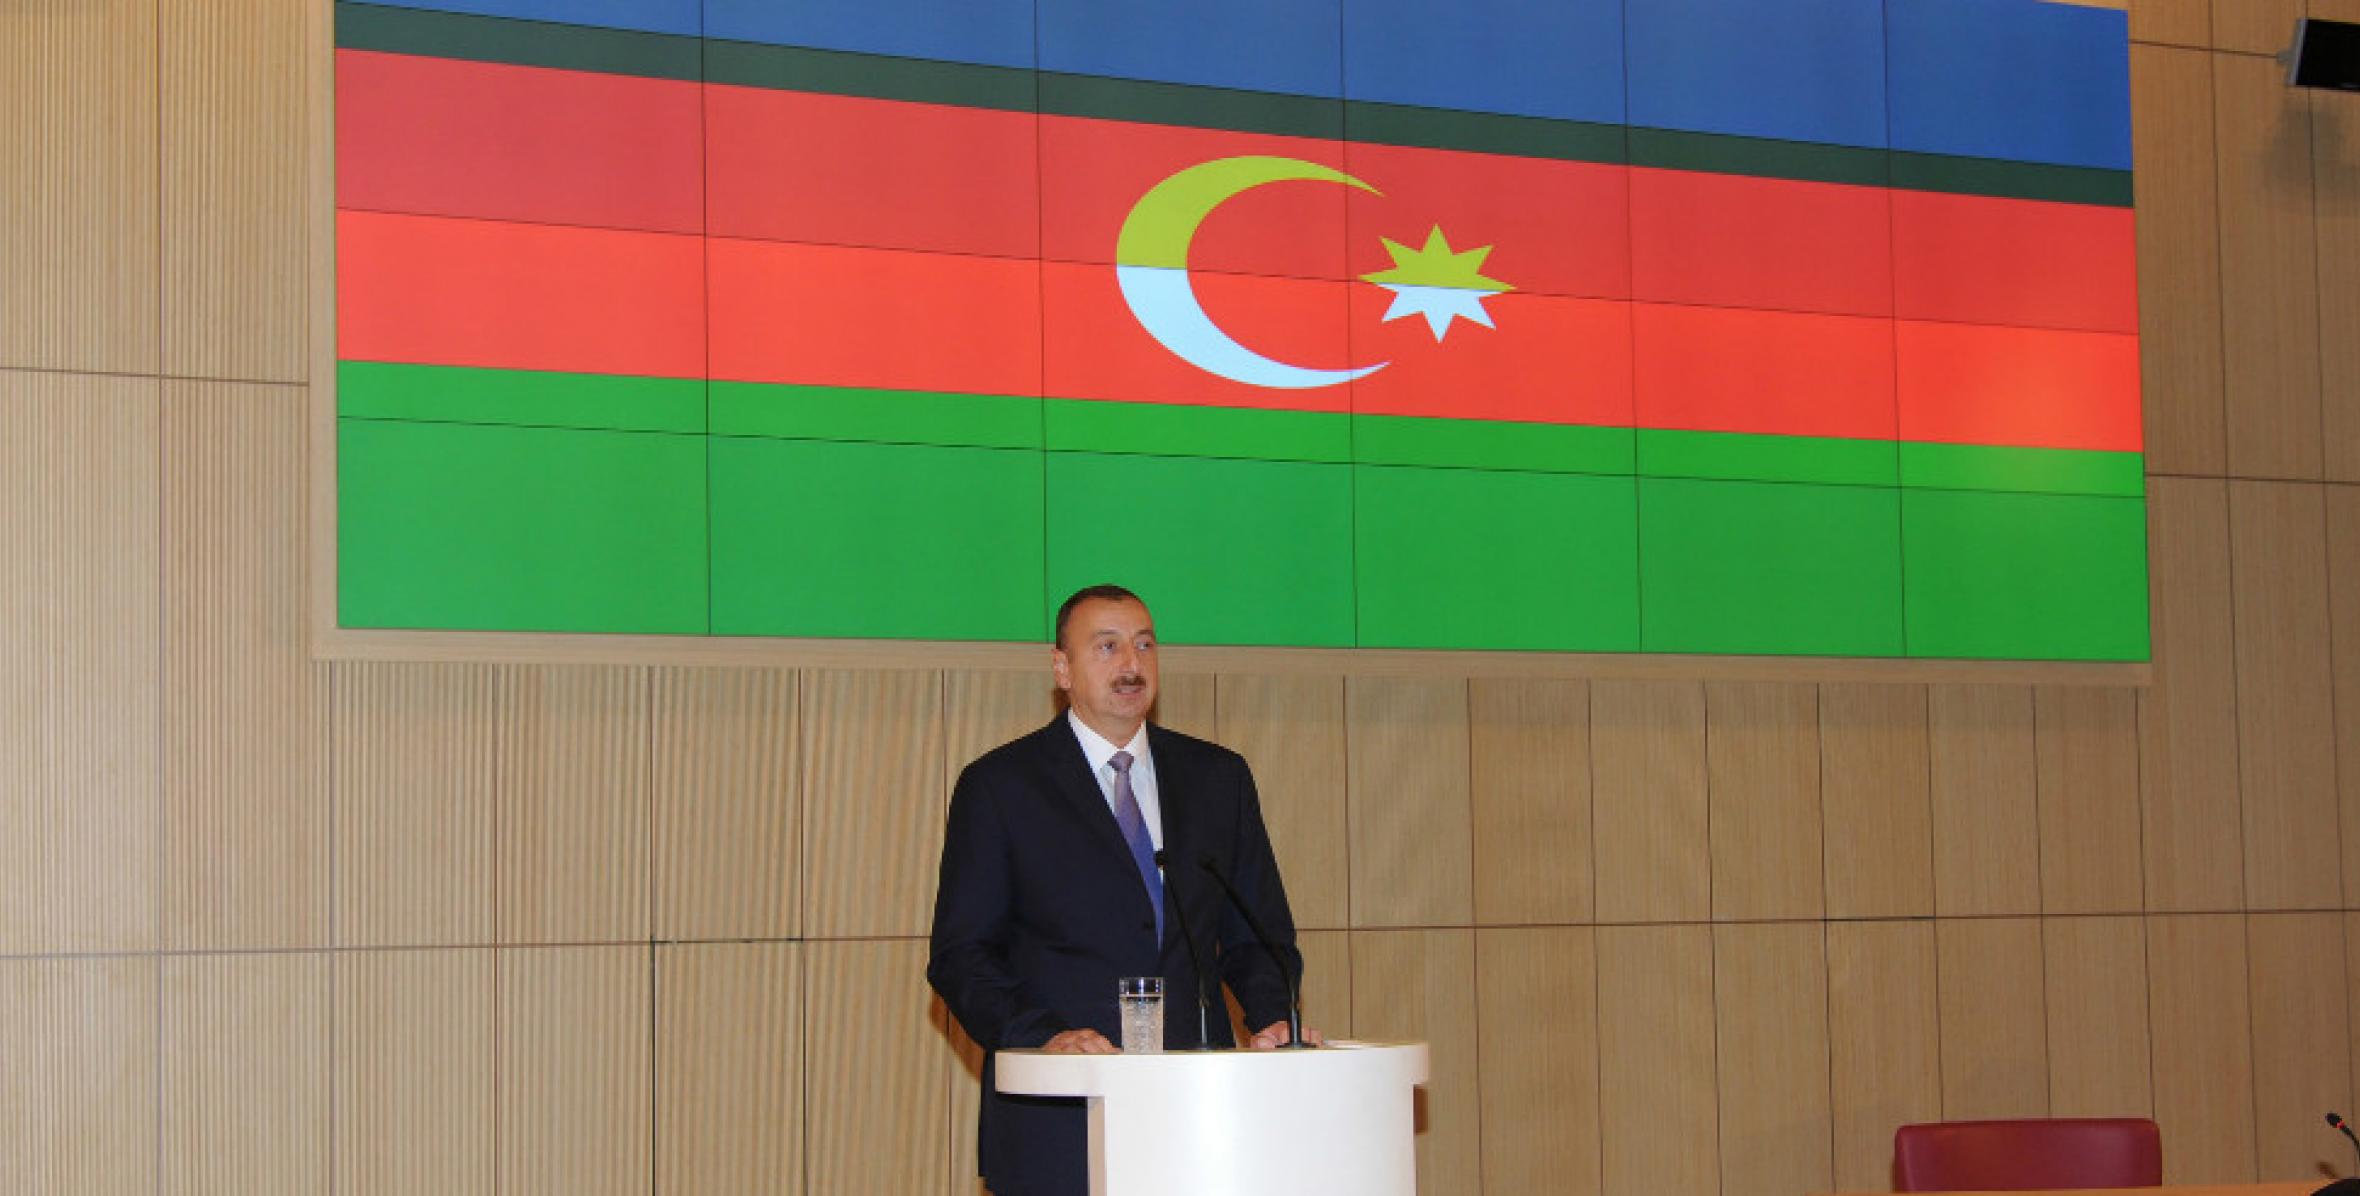 Speech by Ilham Aliyev at the fourth meeting of the heads of diplomatic service